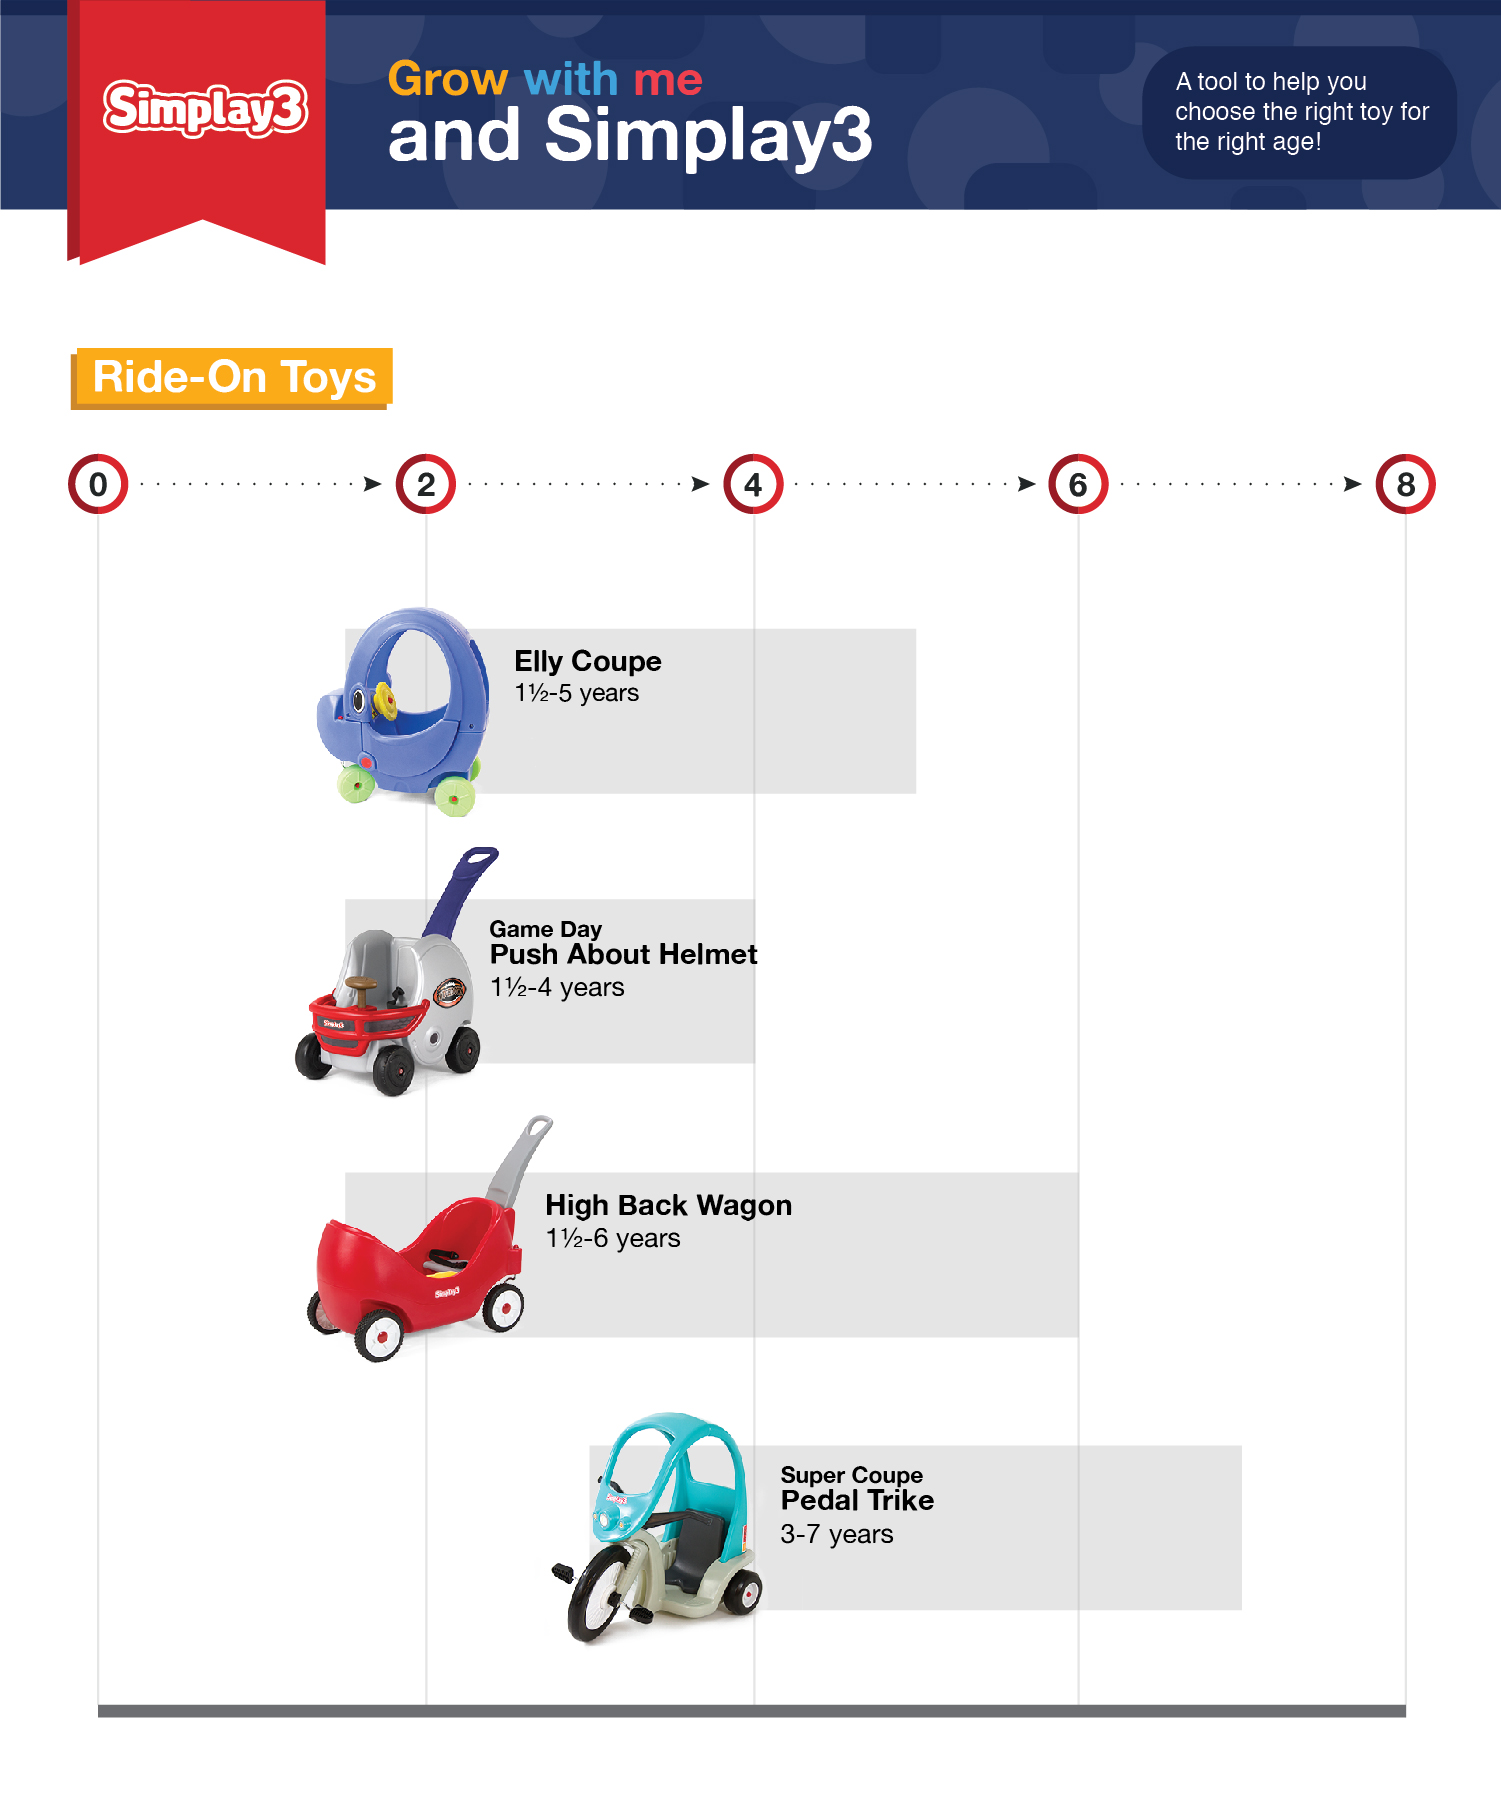 Simplay3-guide-to-ride-on-toys-infogrpahic